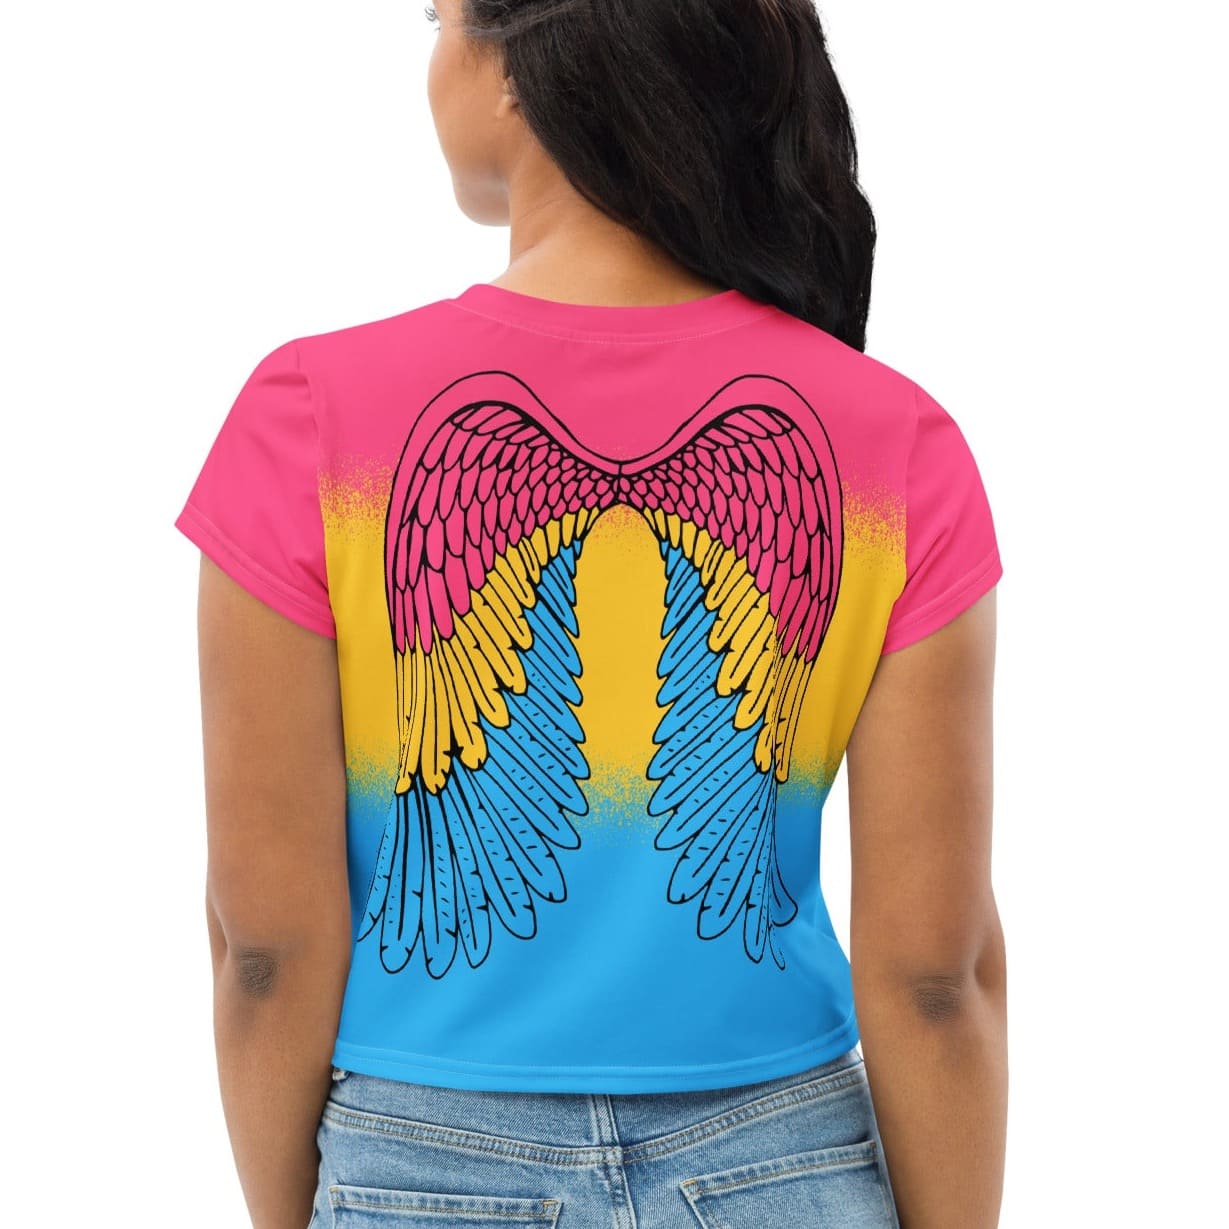 pansexual crop top, pan pride cropped shirt with wings on back